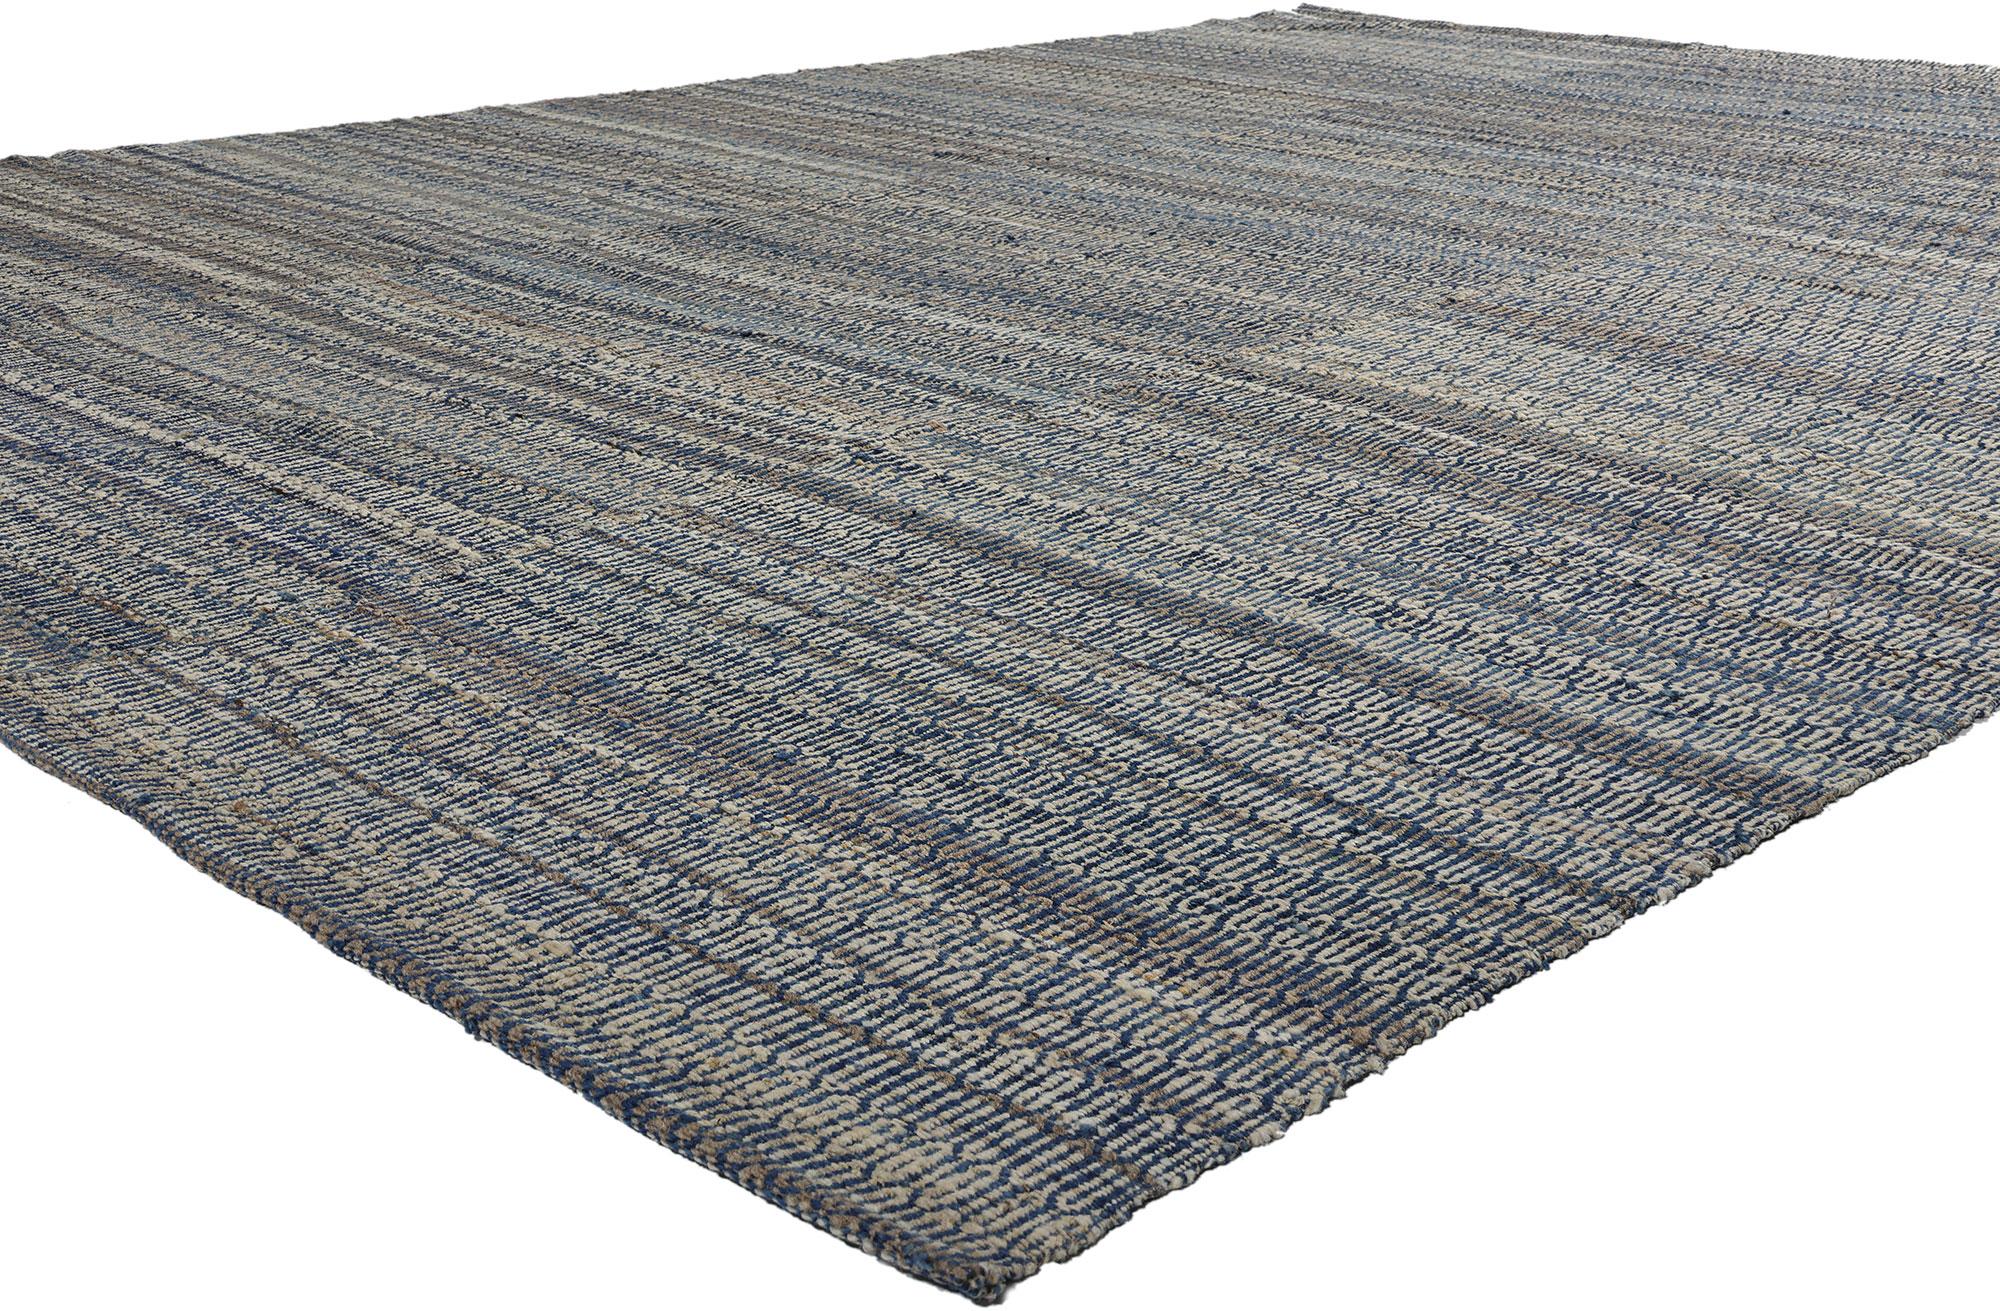 81102 Modern Blue Earth-Tone Geometric Kilim Rug, 08'11 x 11'10. Step aboard into coastal chic living with our exquisite handwoven modern geometric kilim rug, where nautical charm meets sustainable elegance. Crafted with meticulous attention to